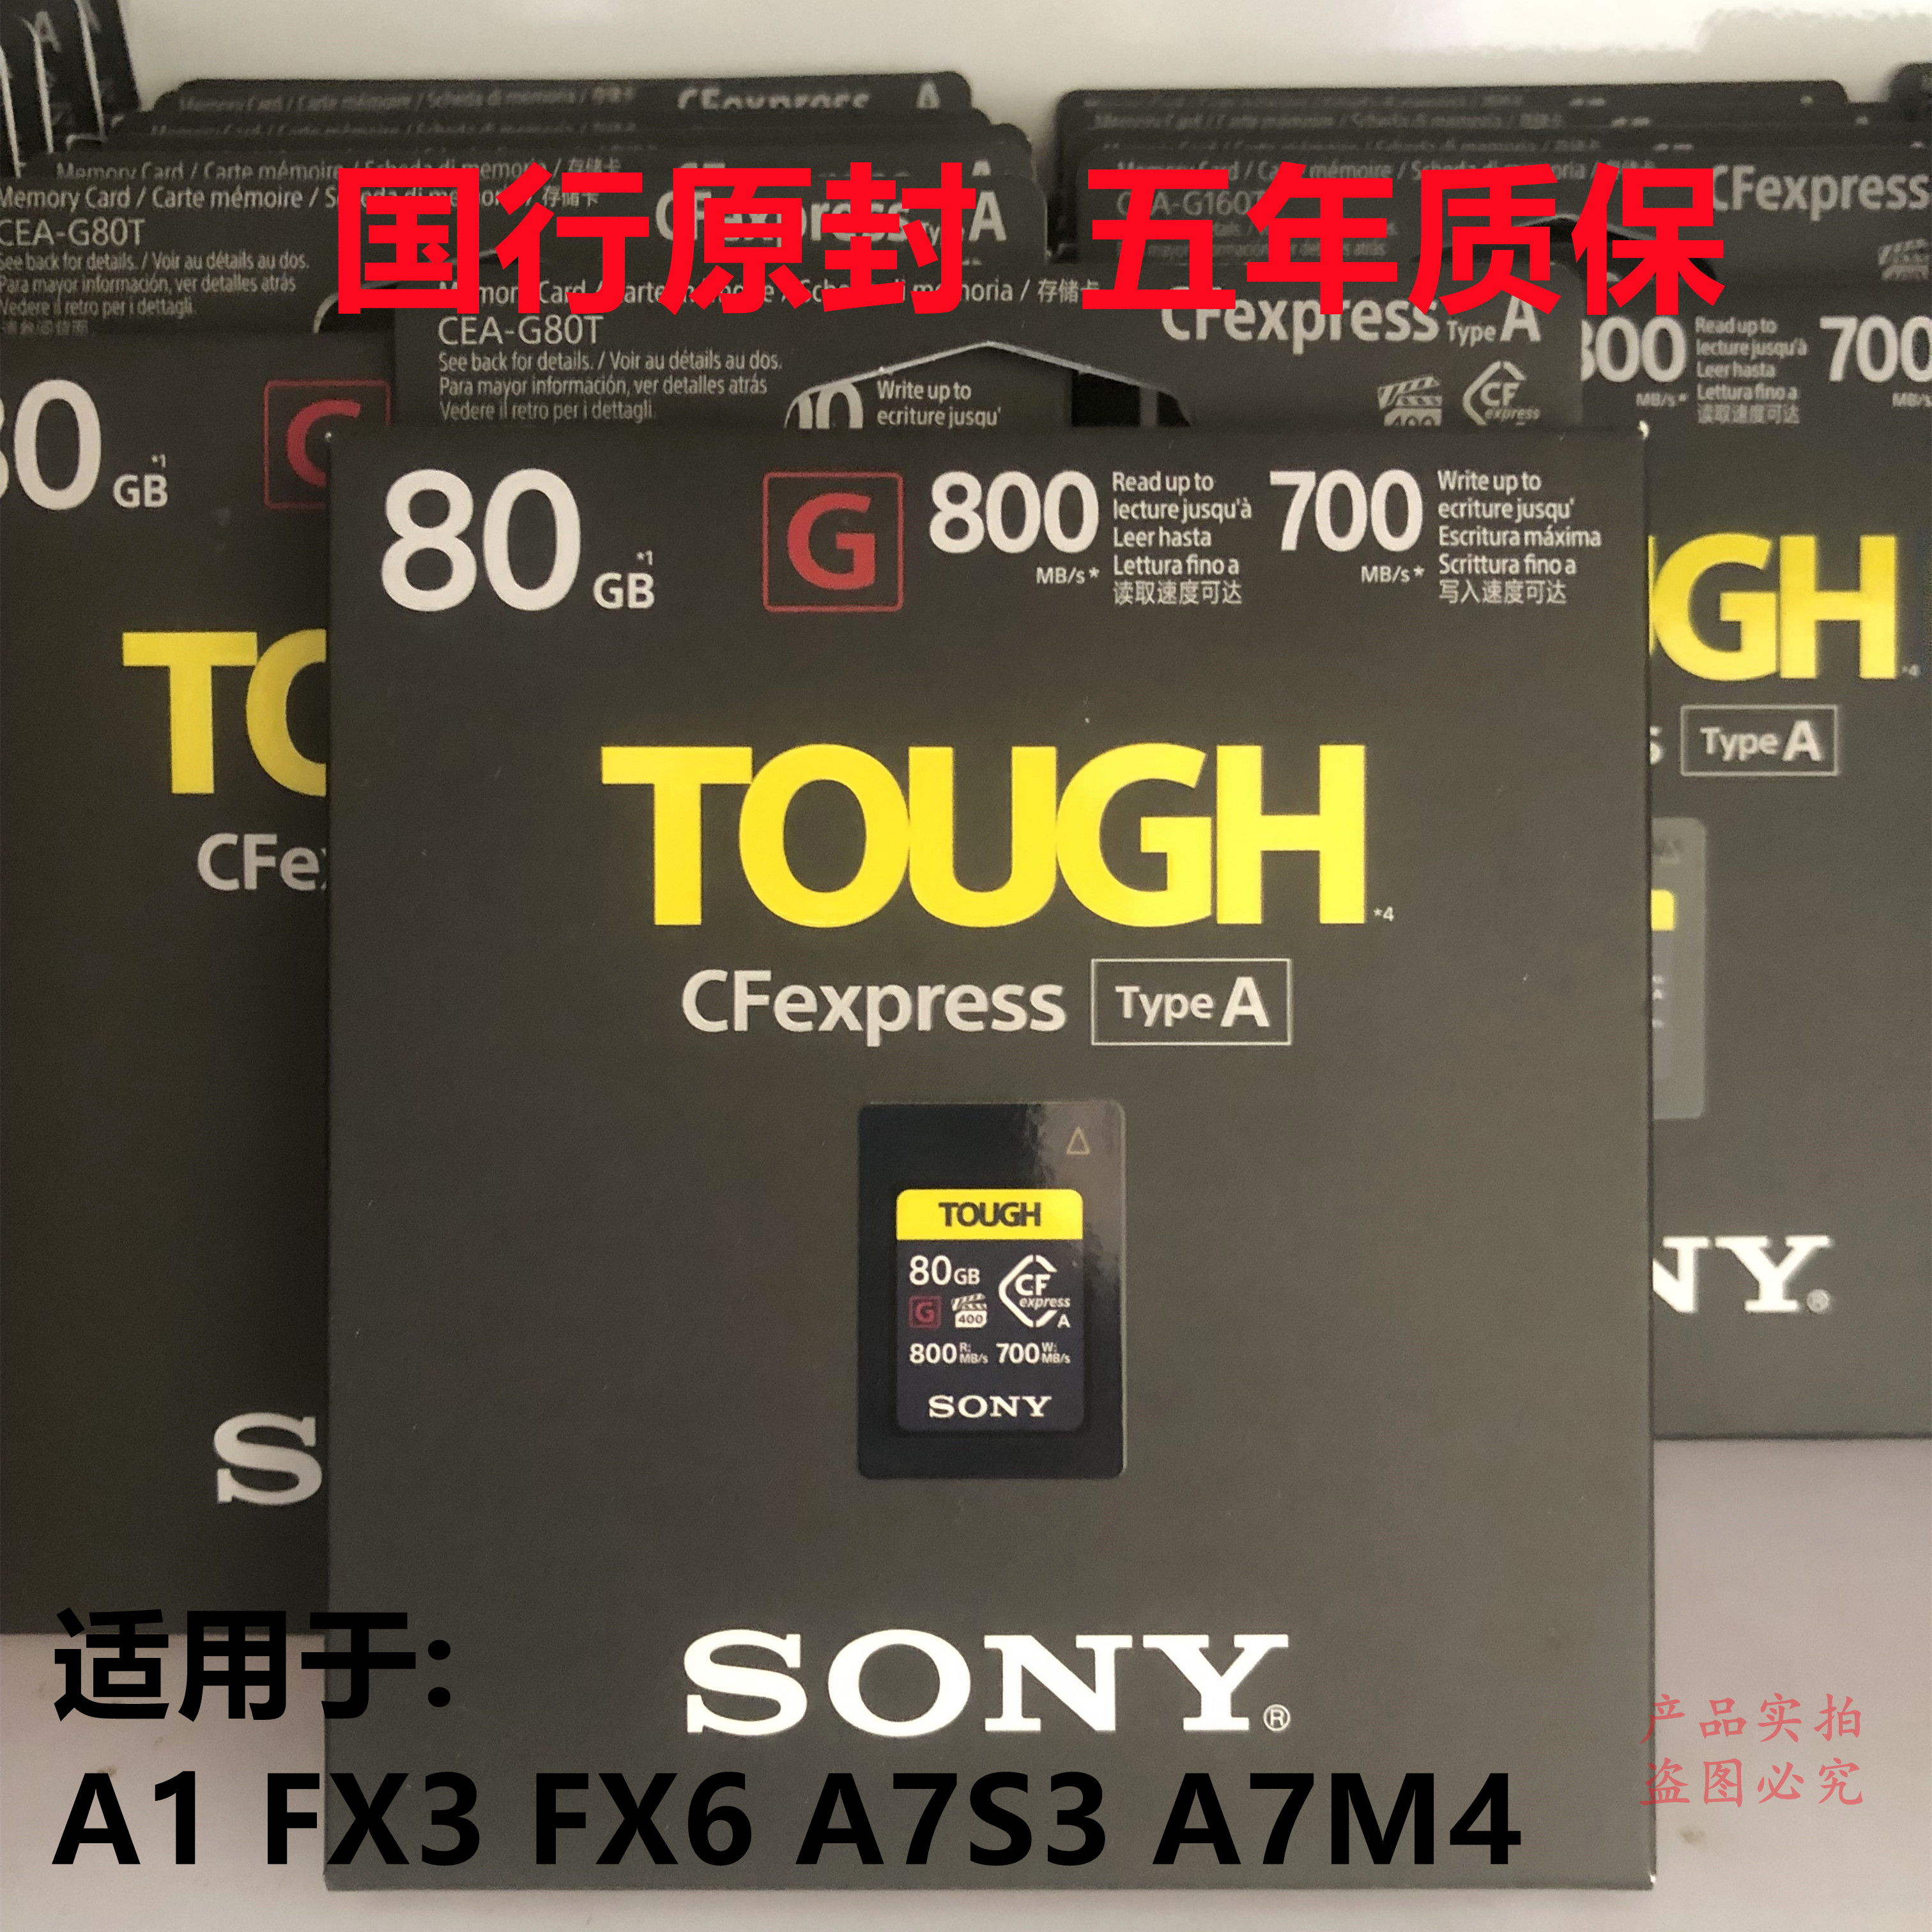 SONY CFexpress TypeA CEA-G80T 80GB 中古美品 - その他